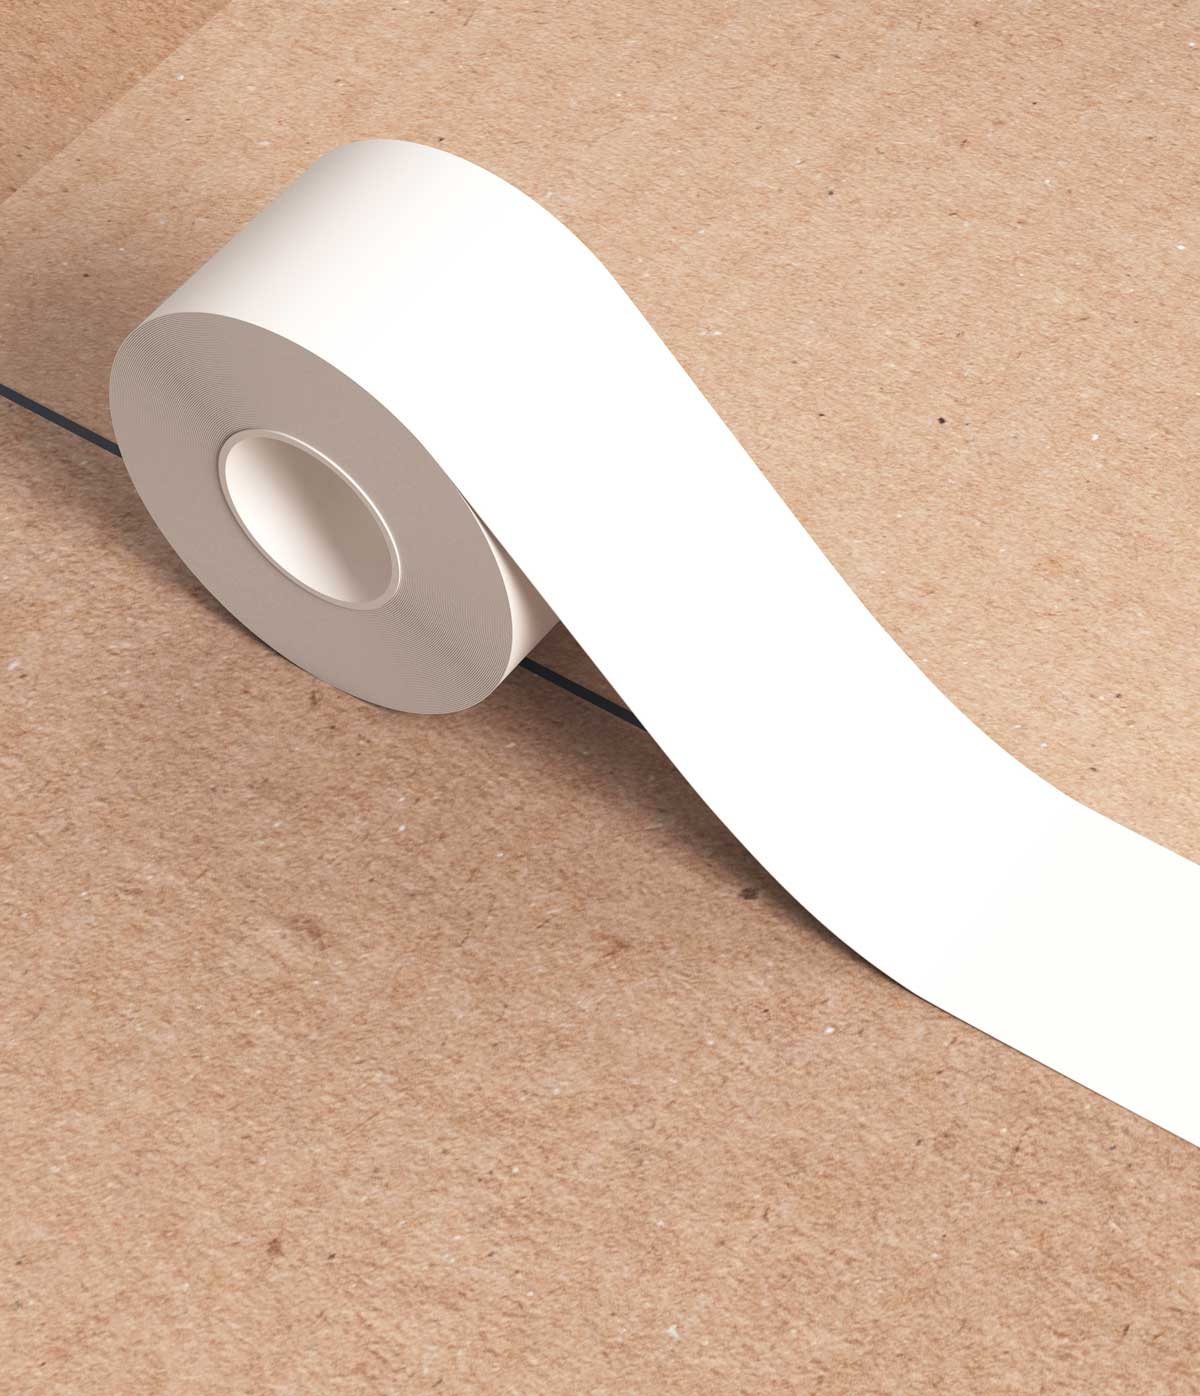 OPP Tape Supplier in Malaysia | 2S Packaging